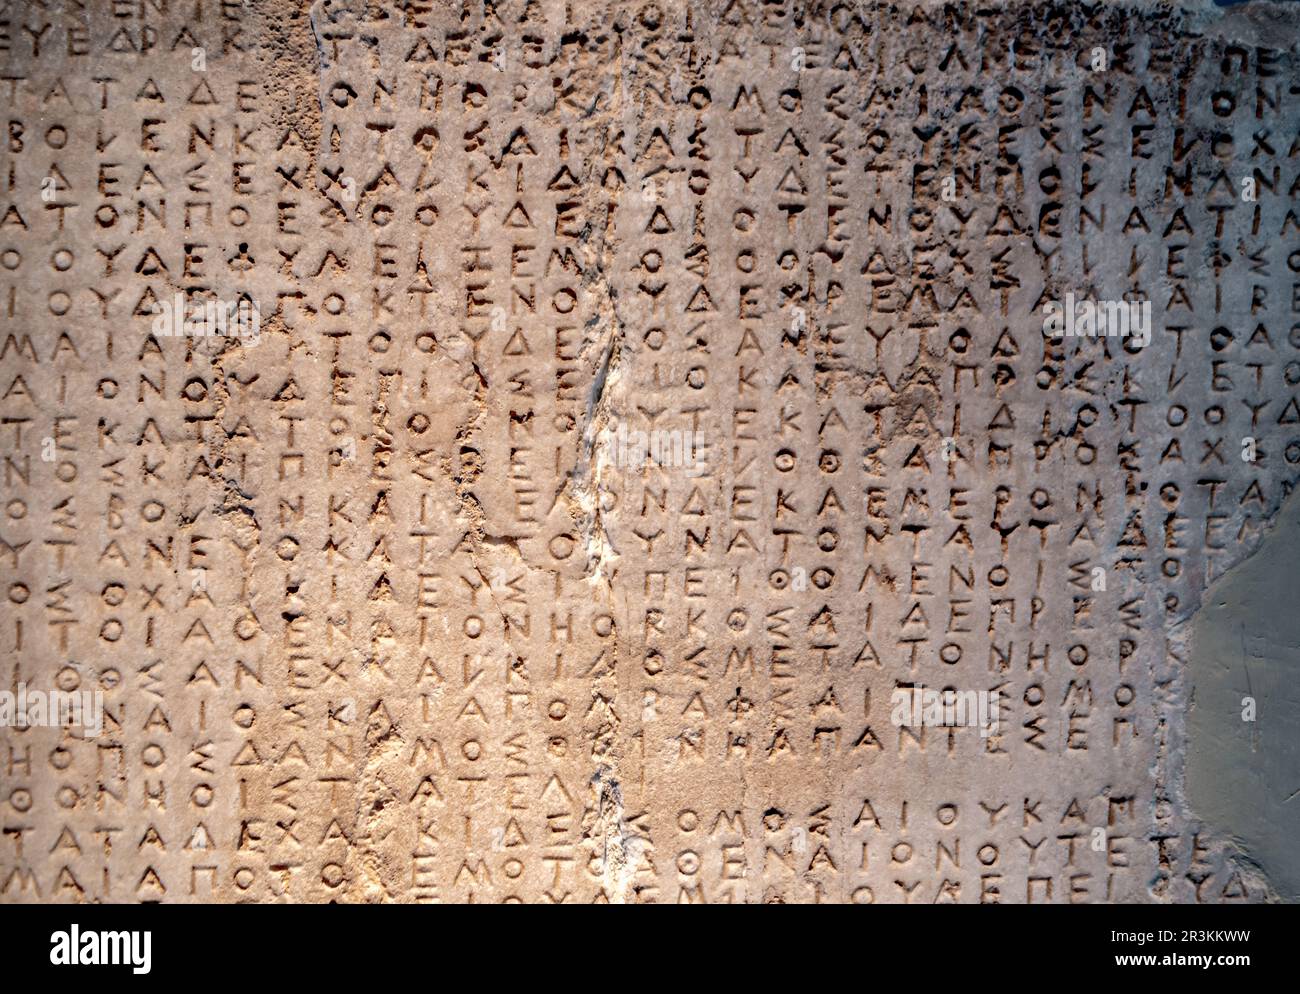 Ancient greek letters in stone Stock Photo